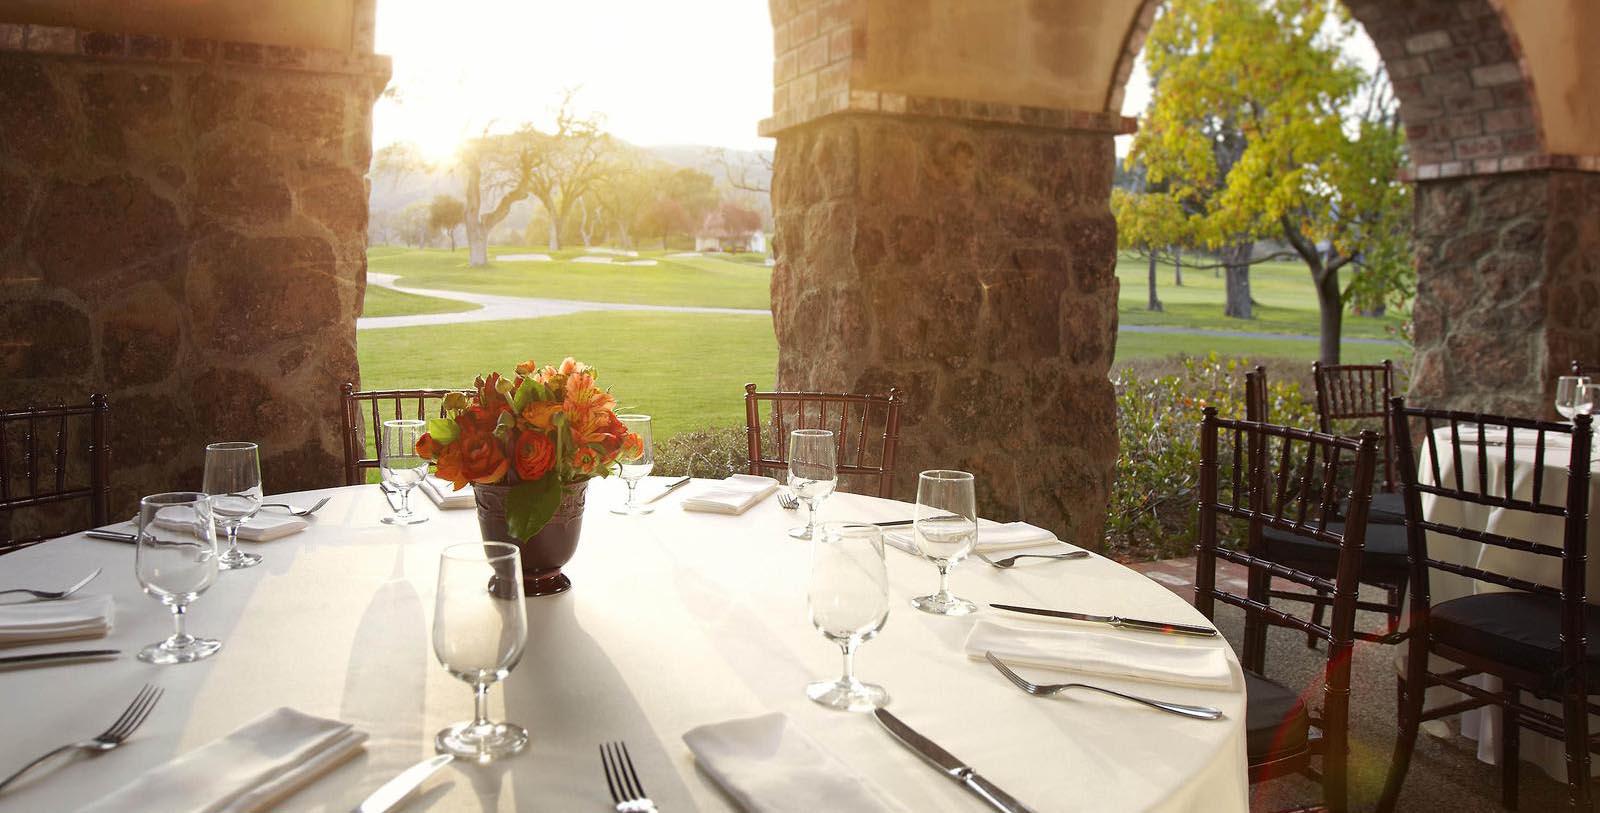 Taste some of the finest wine that the Sonoma Valley has to offer at the Santé Restaurant.